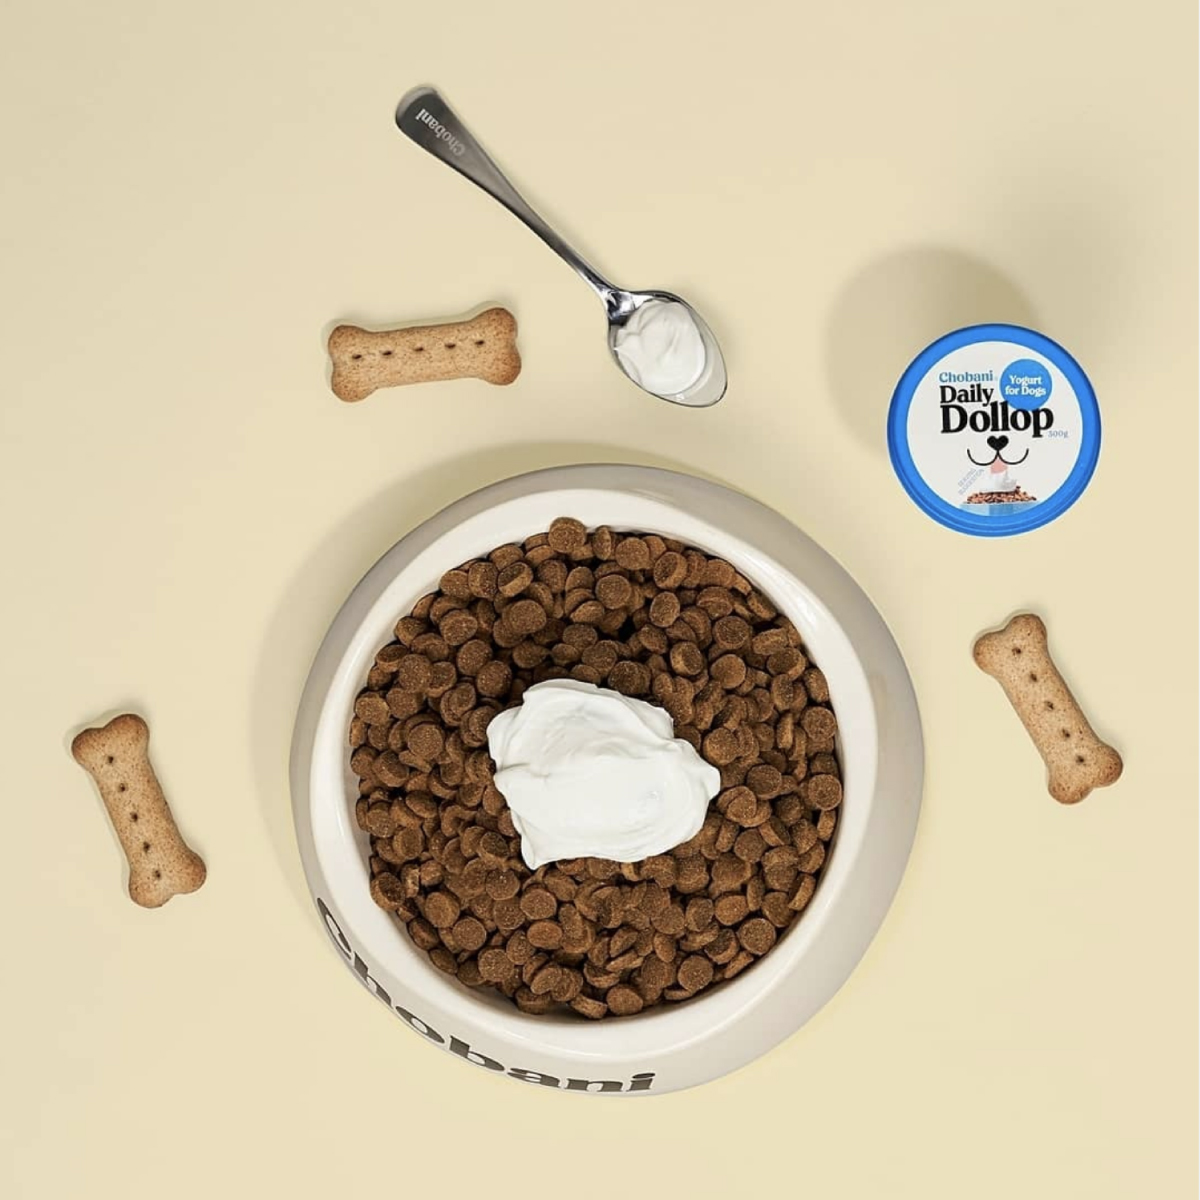 Chobani Daily Dollop - Dog bowl with a serving of Daily Dollop